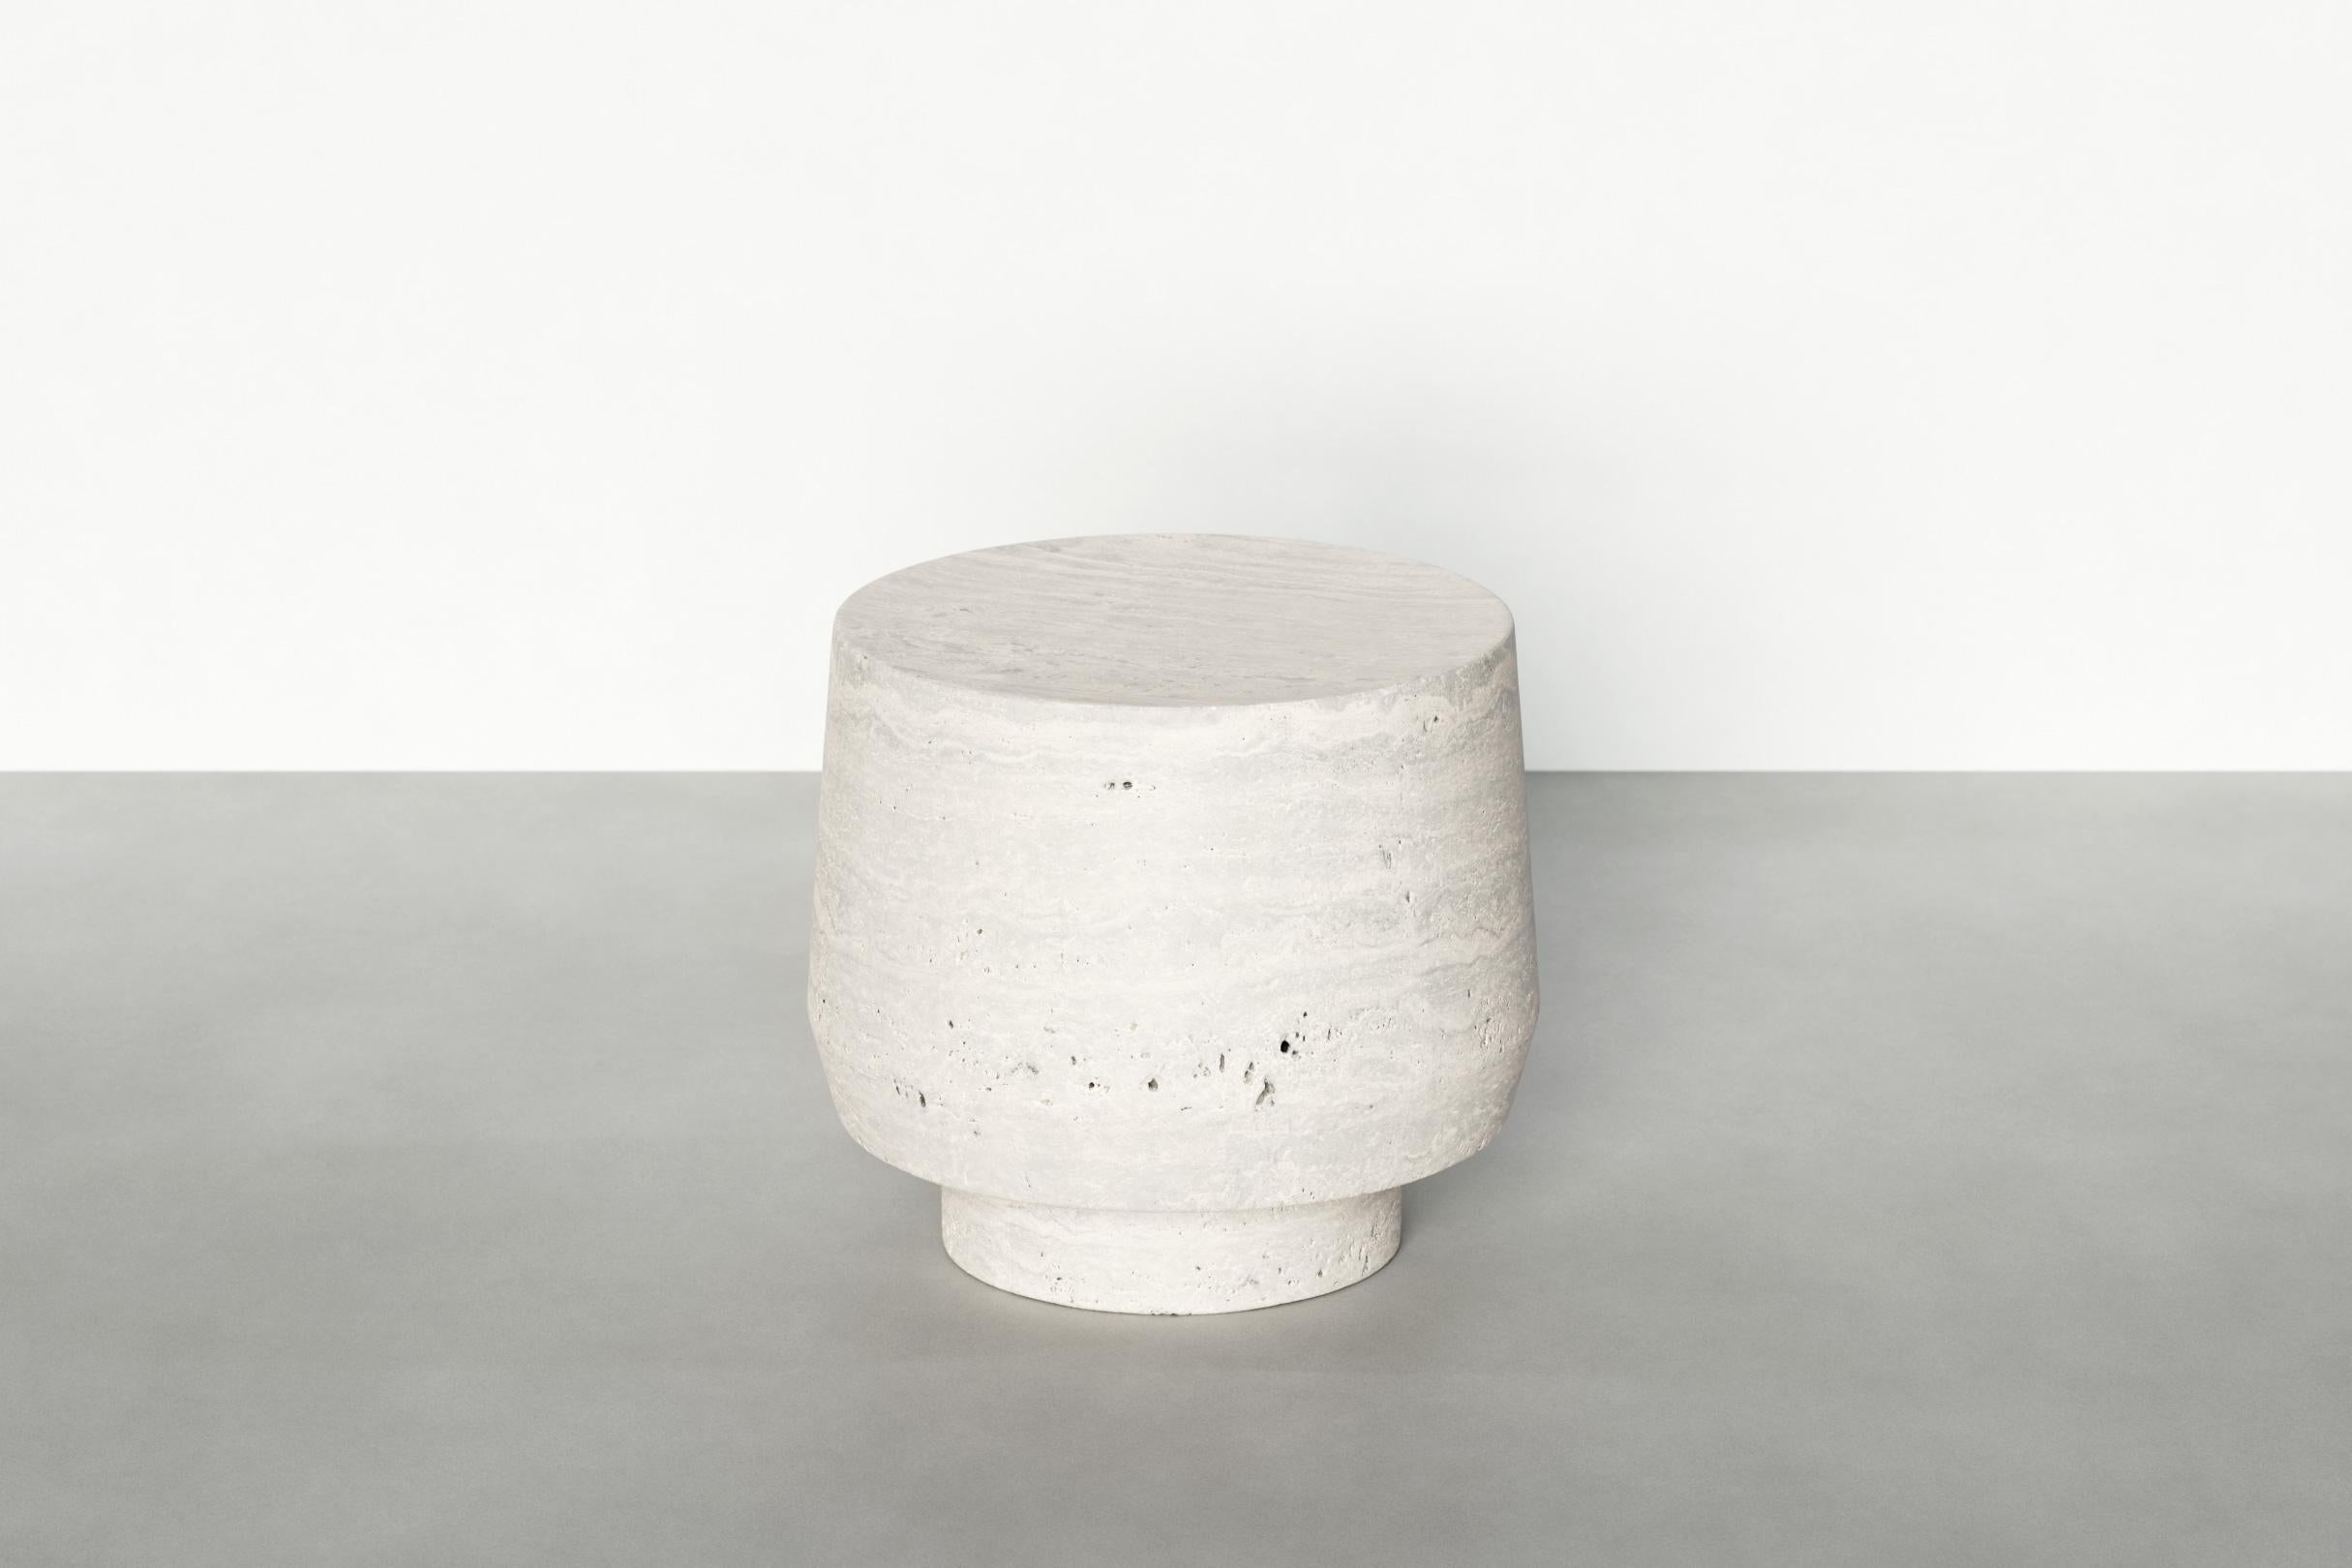 Timeless side table VI by Maria Osminina
Limited Edition of 12
Dimensions: 42 x 42 x 37 cm
Materials: Travertino Romano

Timeless is a series of pieces of stone furniture in which the aesthetic vector is aimed at a deep sense of time as being. It is